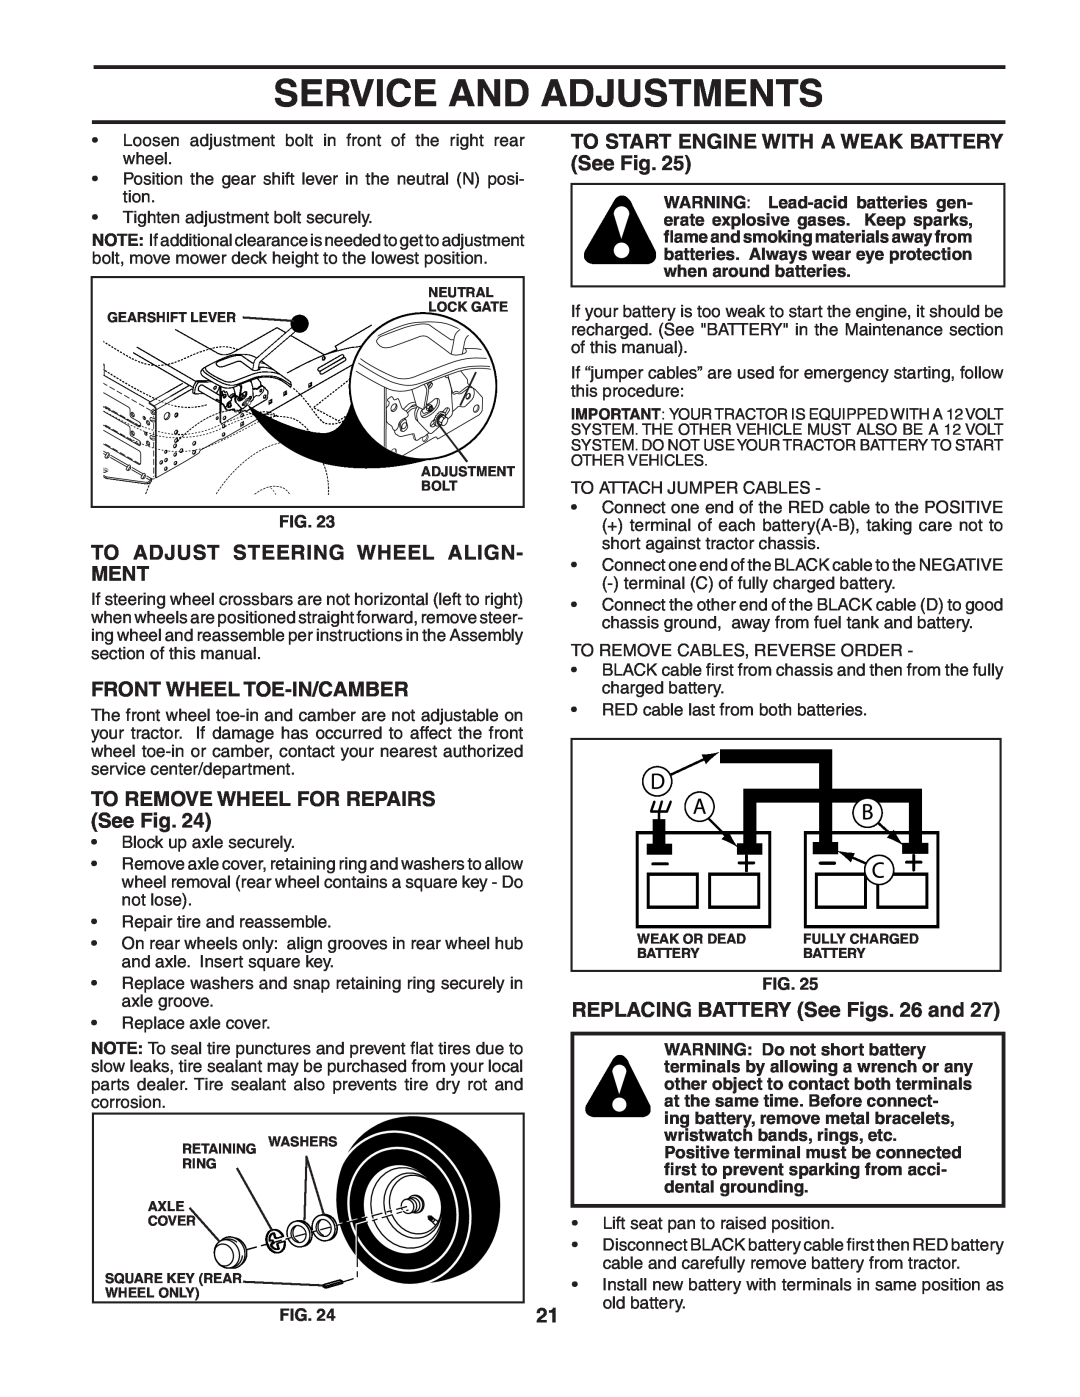 Poulan PO1742STB To Adjust Steering Wheel Align- Ment, Front Wheel Toe-In/Camber, TO REMOVE WHEEL FOR REPAIRS See Fig 